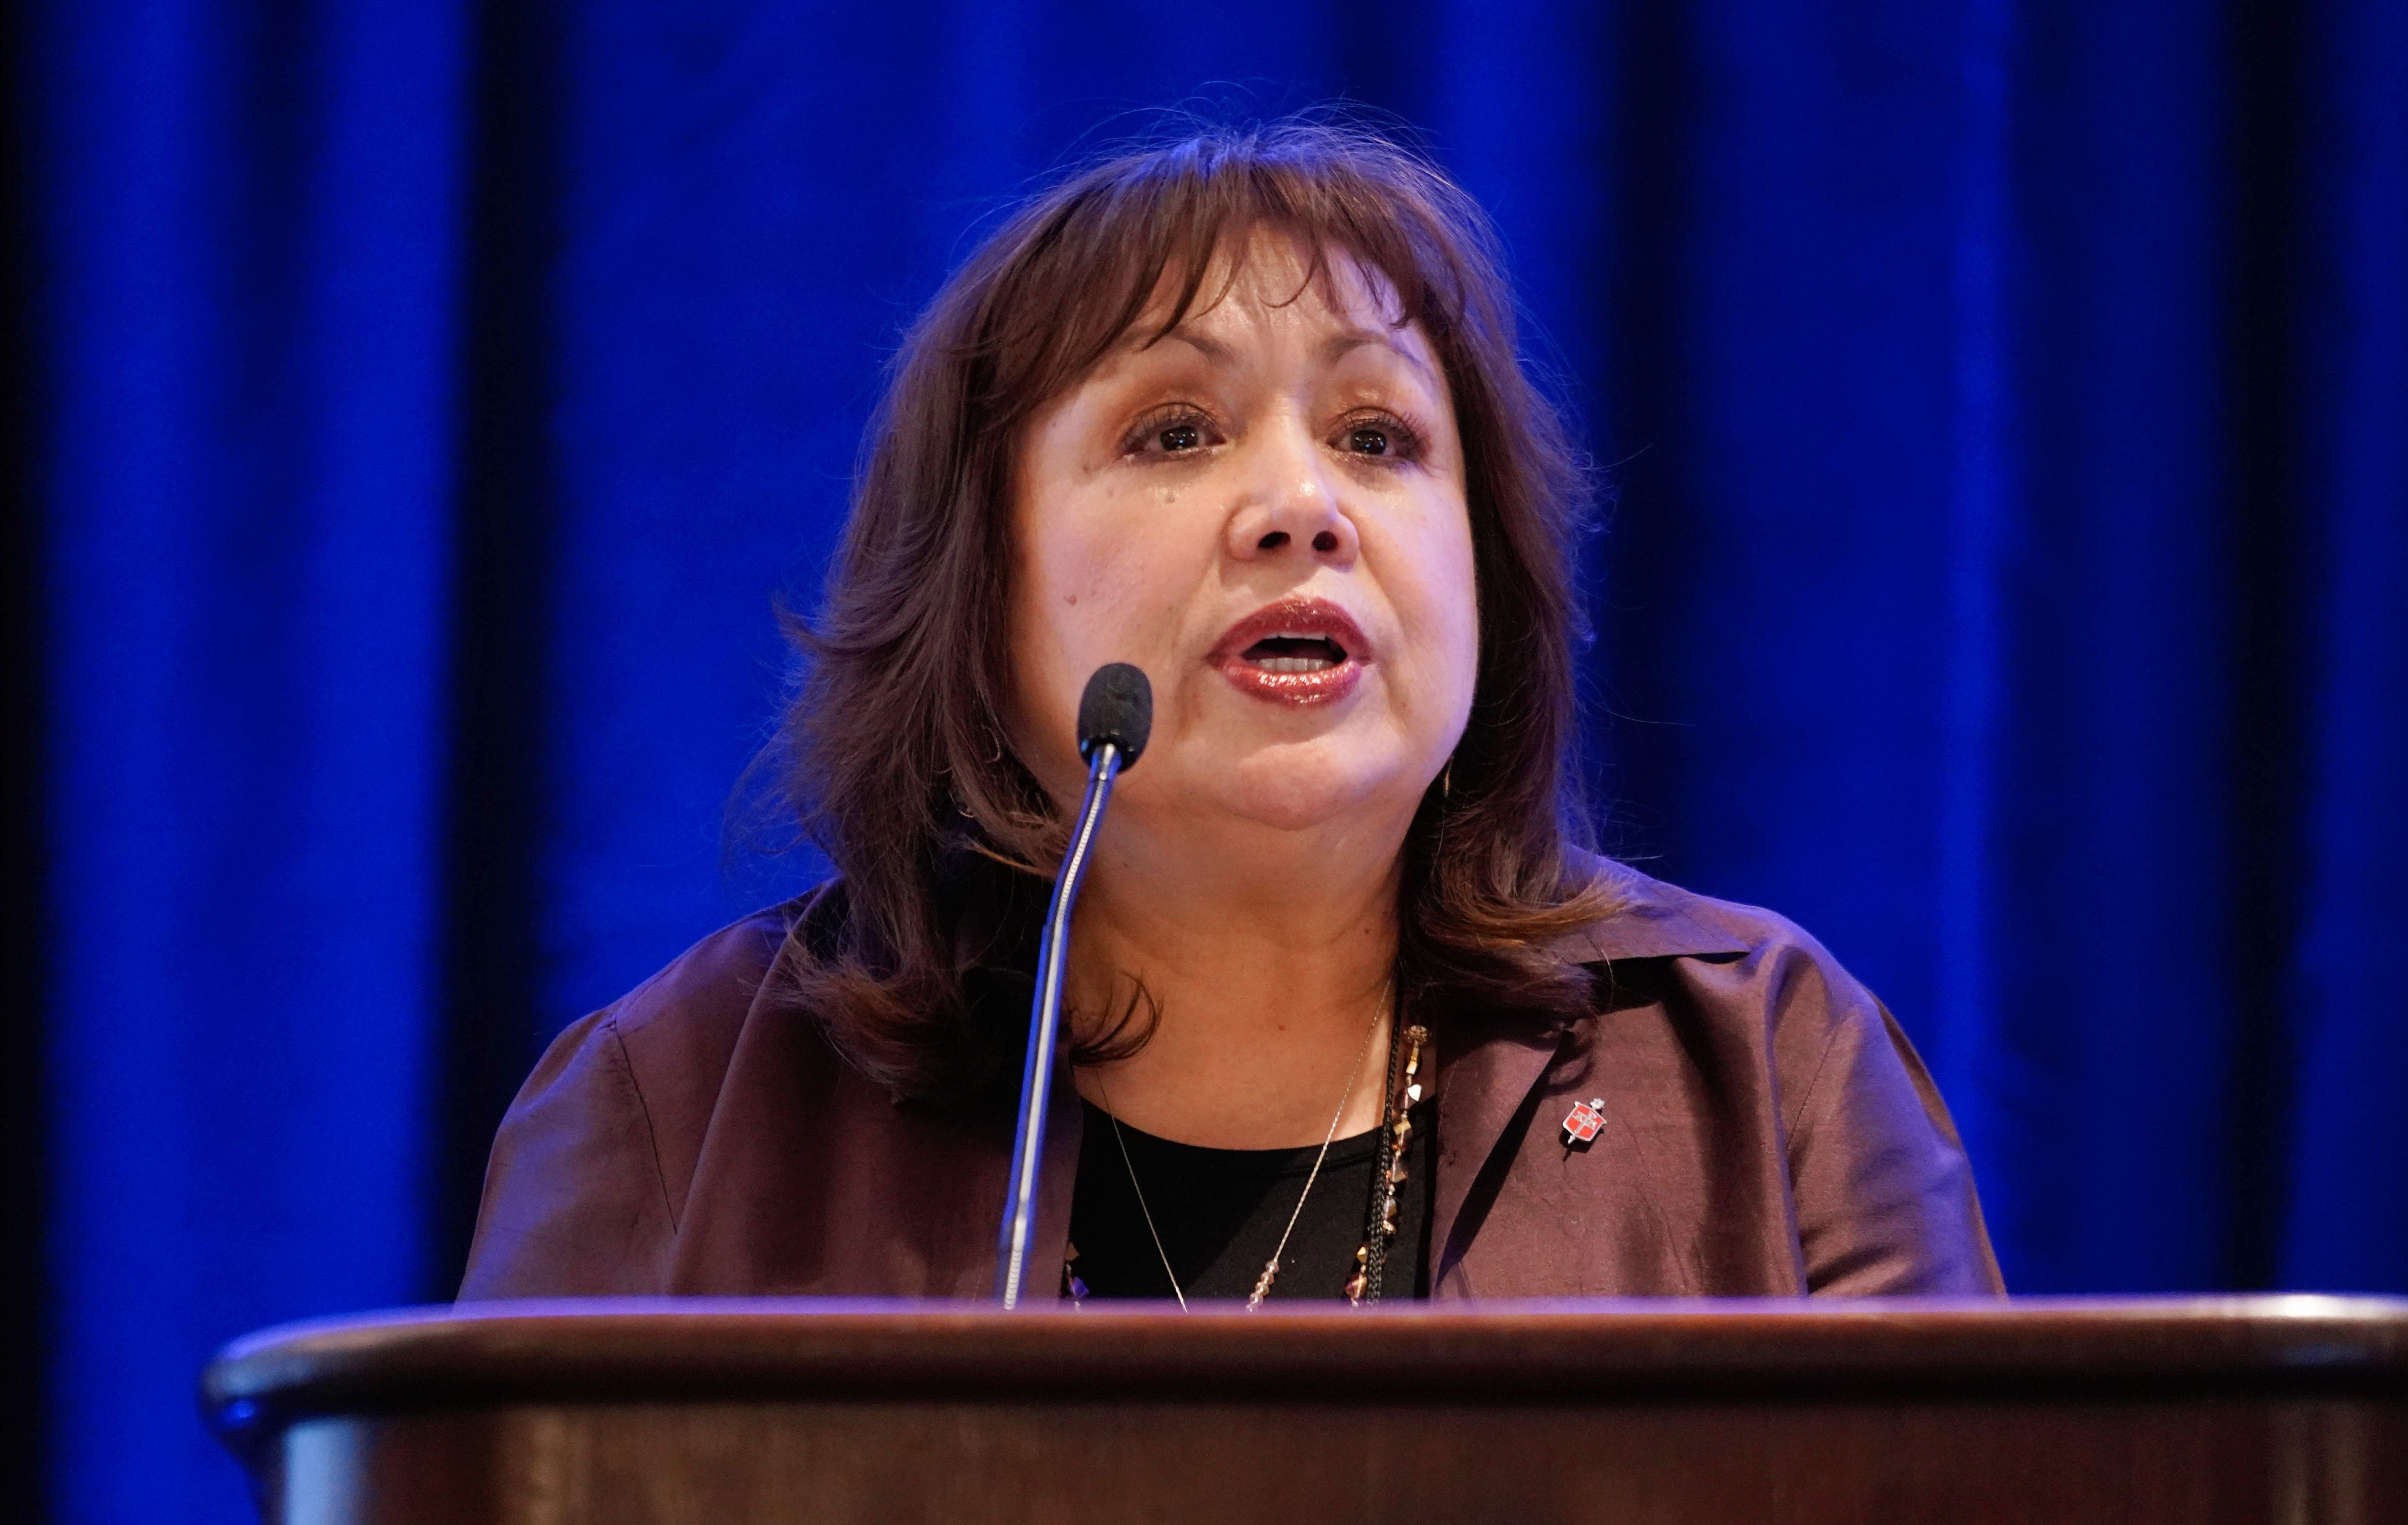 Bishop Minerva Carcaño speaks to her fellow episcopal leaders about the work of the Immigration Task Force during the Council of Bishops meeting near Chicago. Photo by the Rev. Todd Rossnagel, Louisiana Conference.